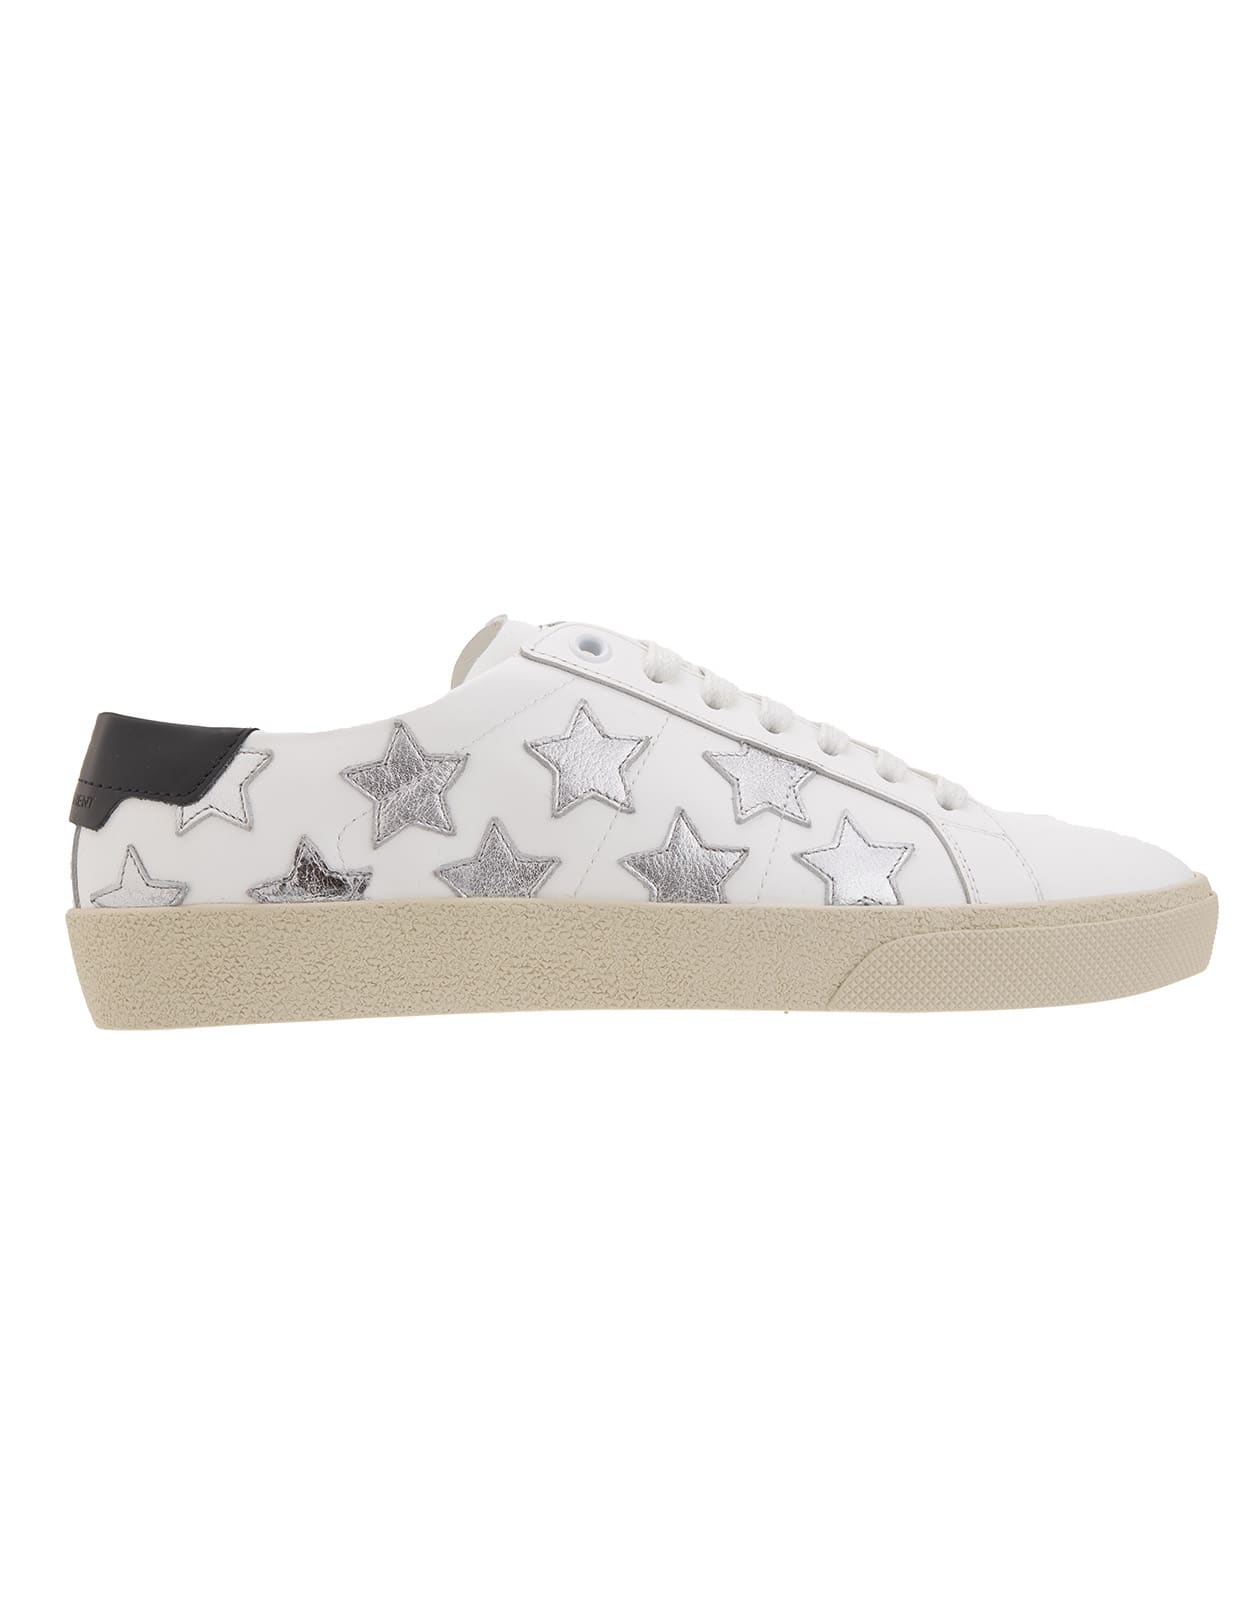 Photo of  Saint Laurent Signature California Sneakers In White And Silver Leather- shop Saint Laurent Sneakers online sales